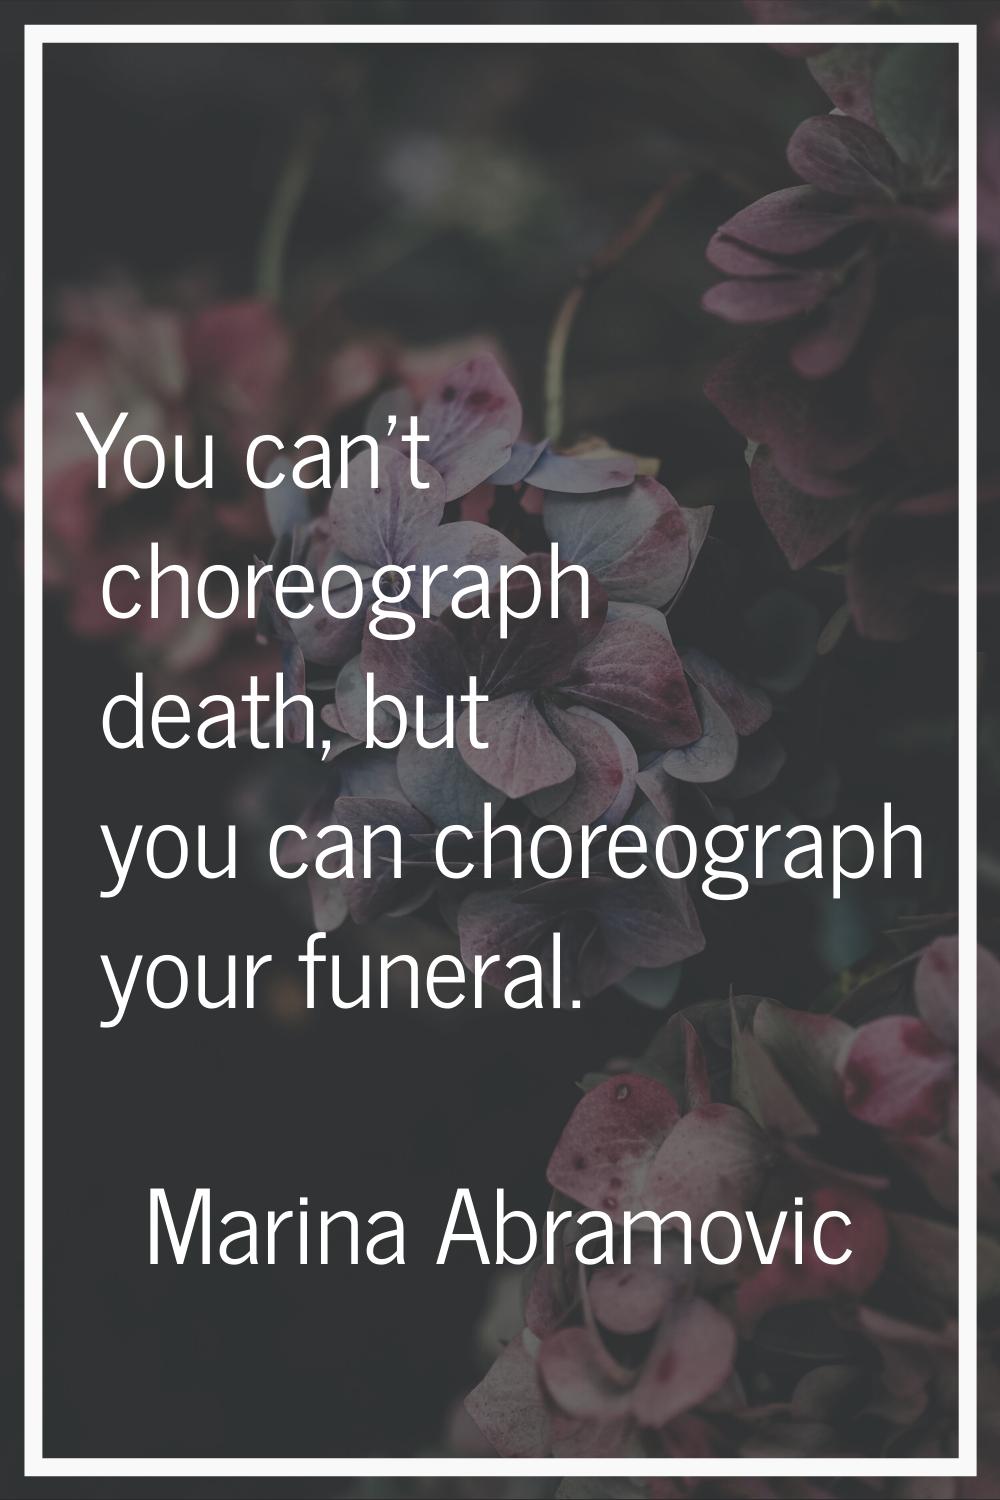 You can't choreograph death, but you can choreograph your funeral.